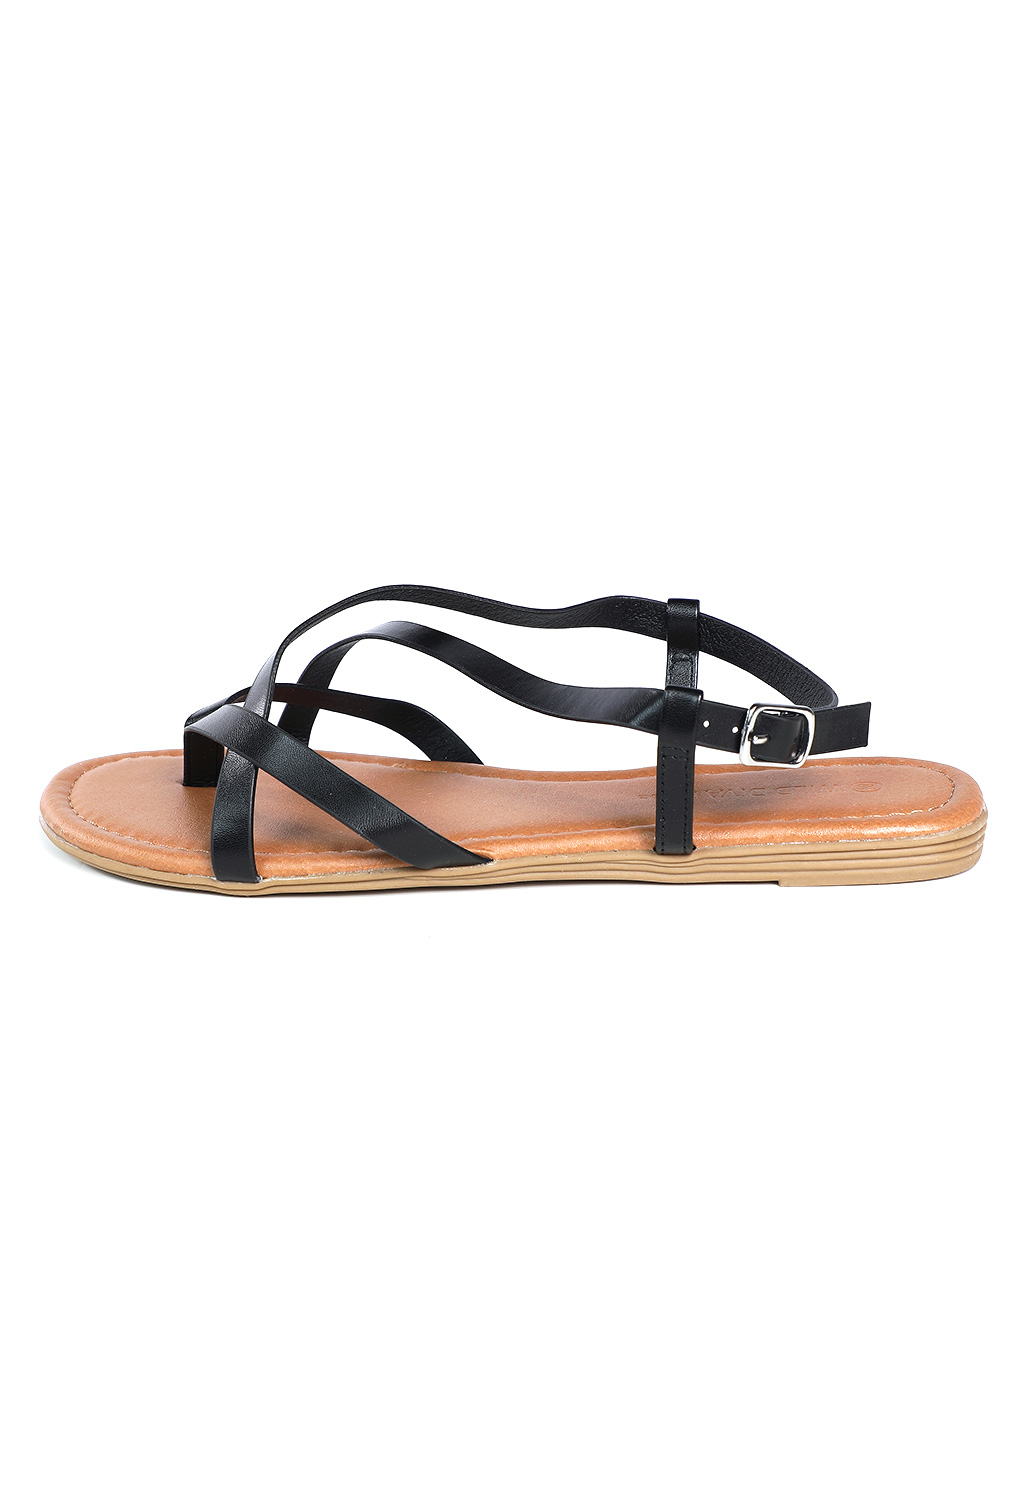 CRUISE STRAPPY SANDALS